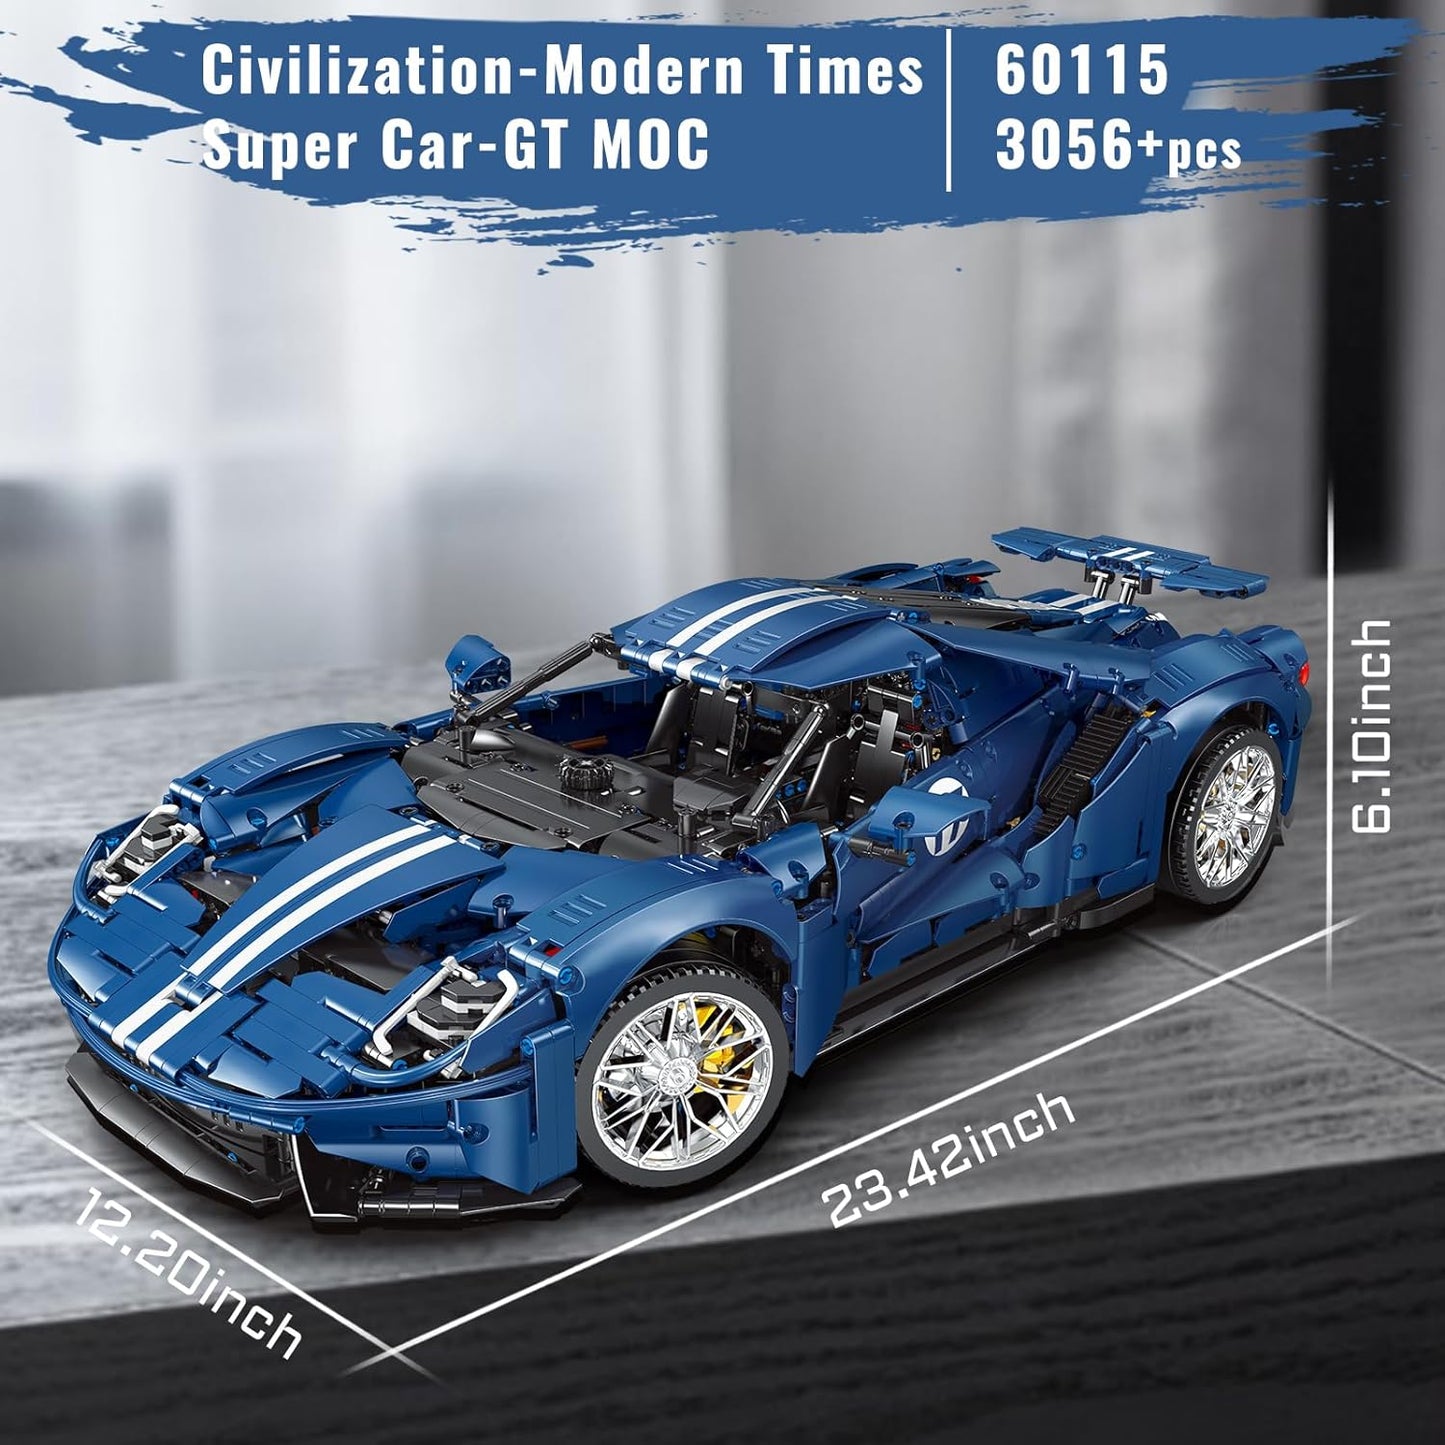 JMBricklayer 60115 Sports Car Building Block Kits, Classic Blue Supercars 1:8 Model MOC Toy Building Sets, Collectible Race Car Model, for Vehicle Enthusiasts, 12+ Boys, Girls and Adults